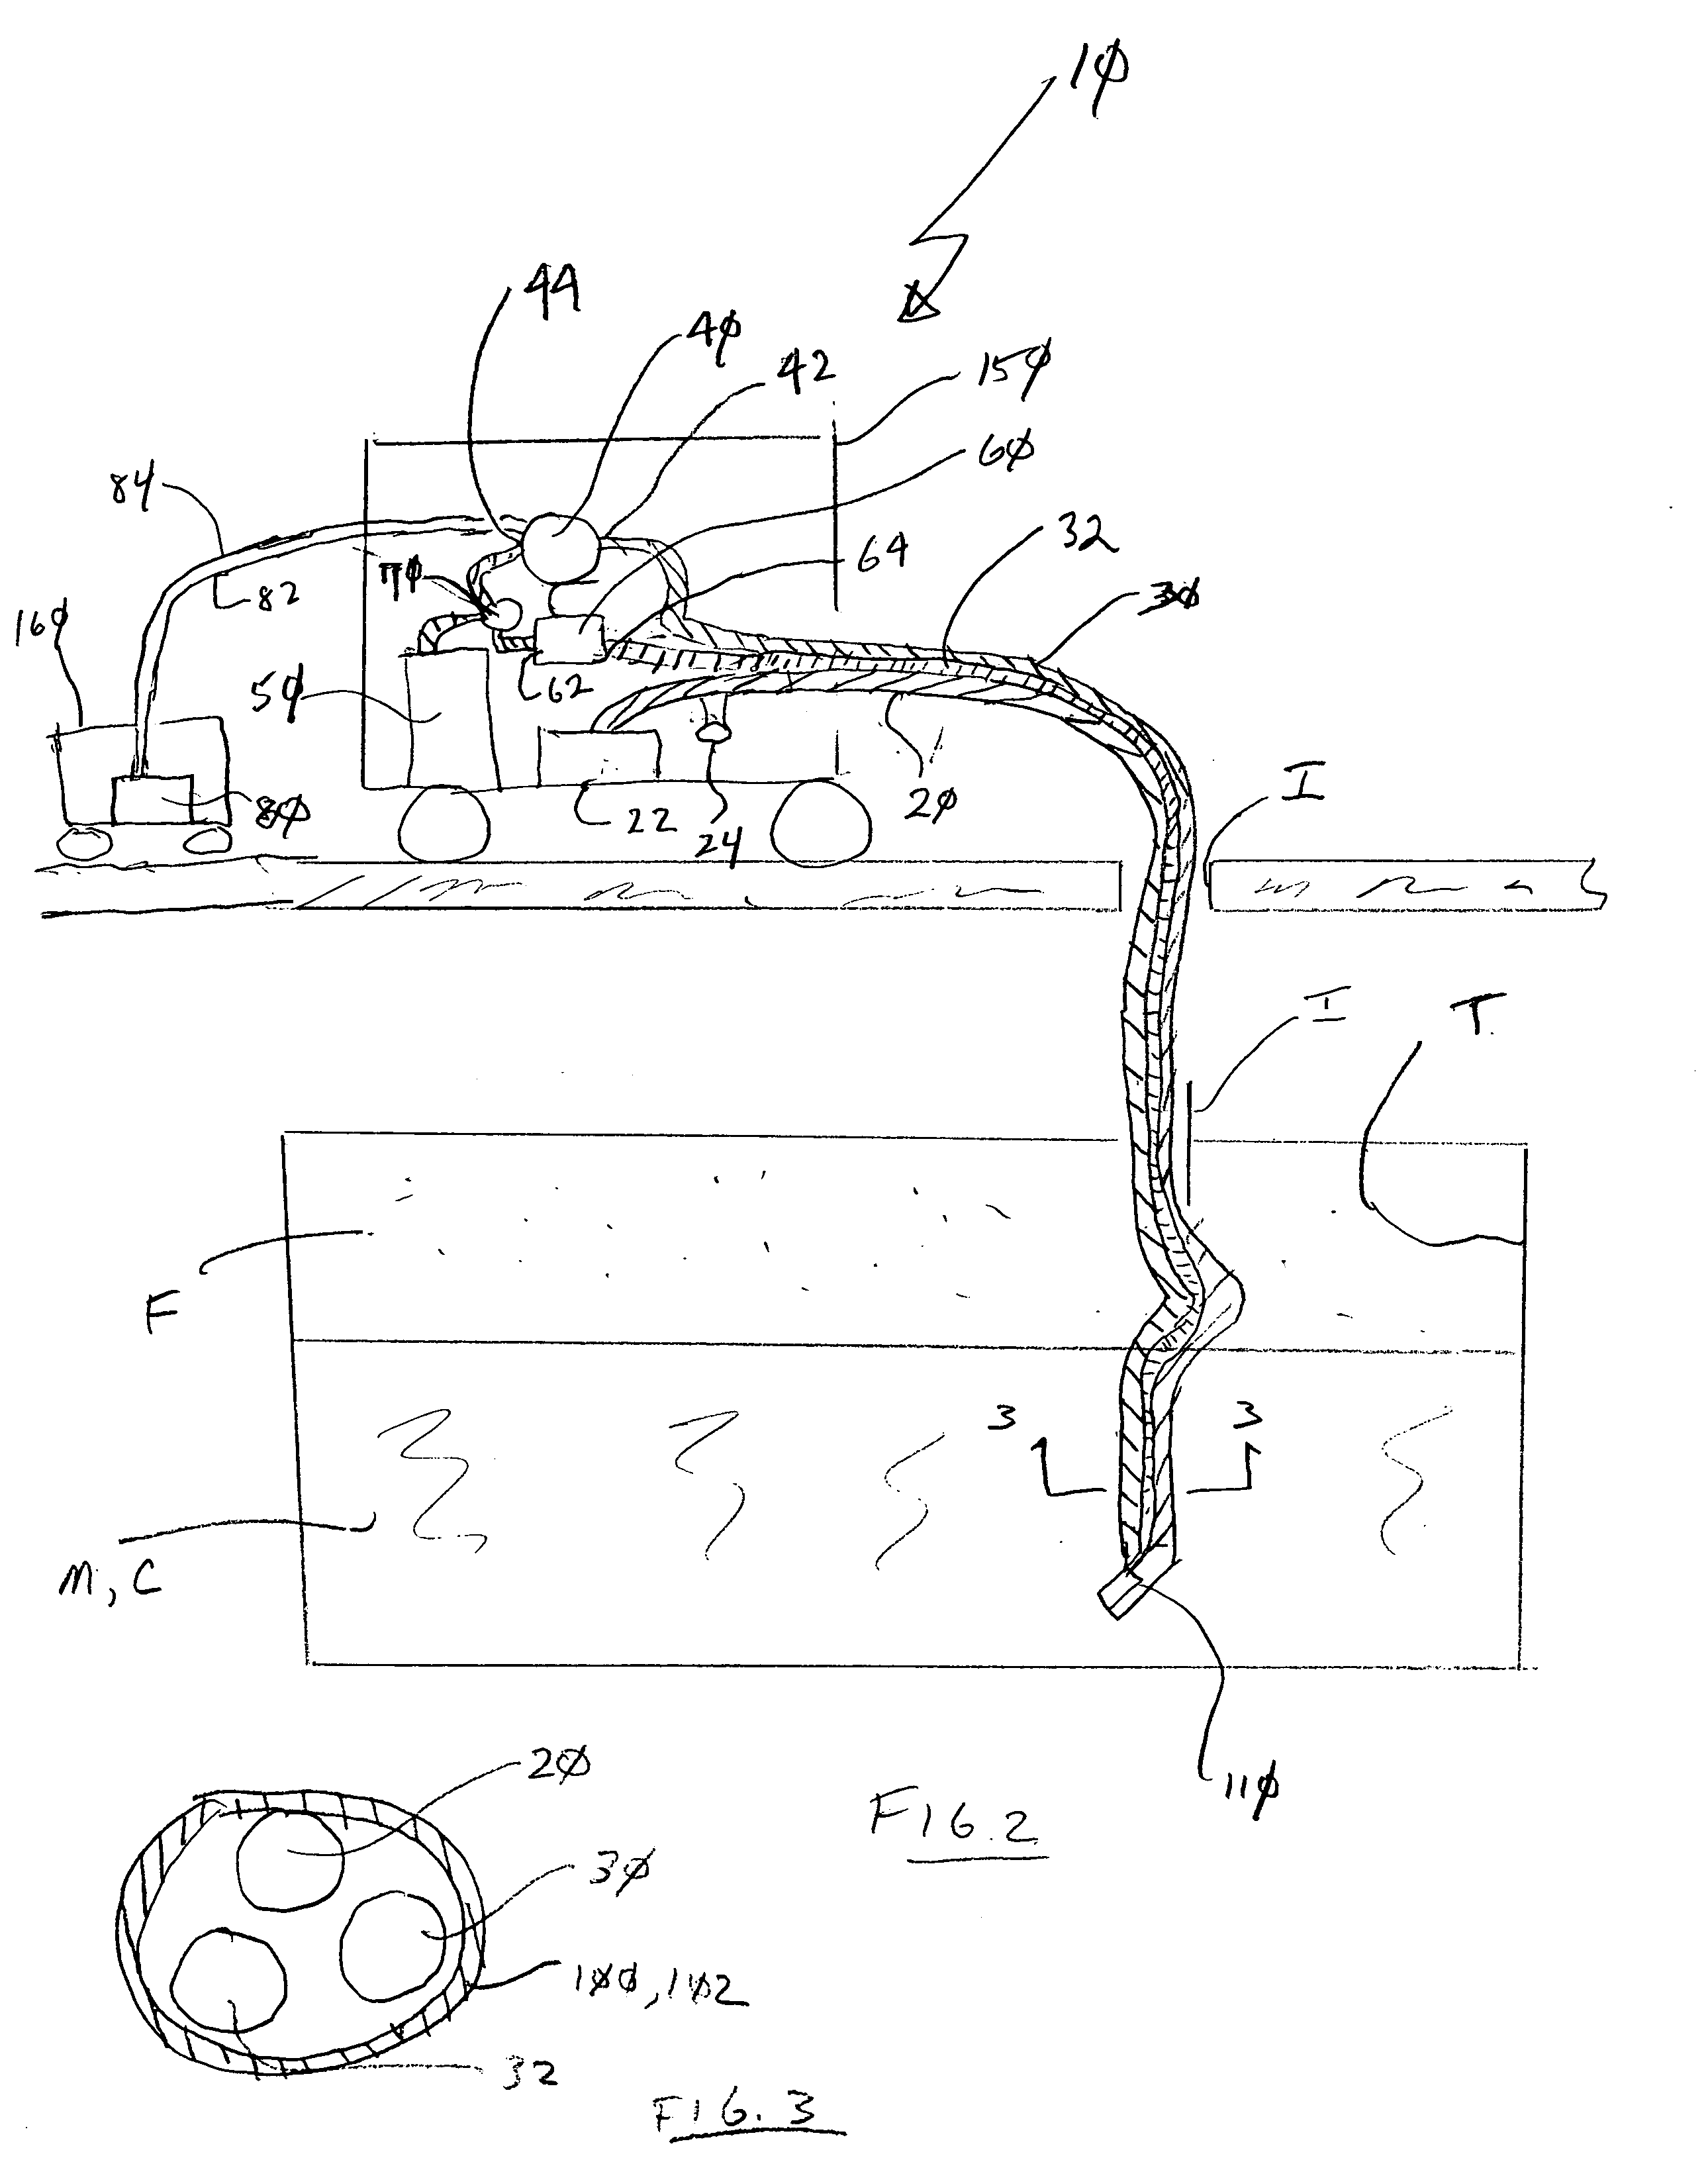 Apparatus and method for detecting and removing moisture and contaminants in a fuel storage tank